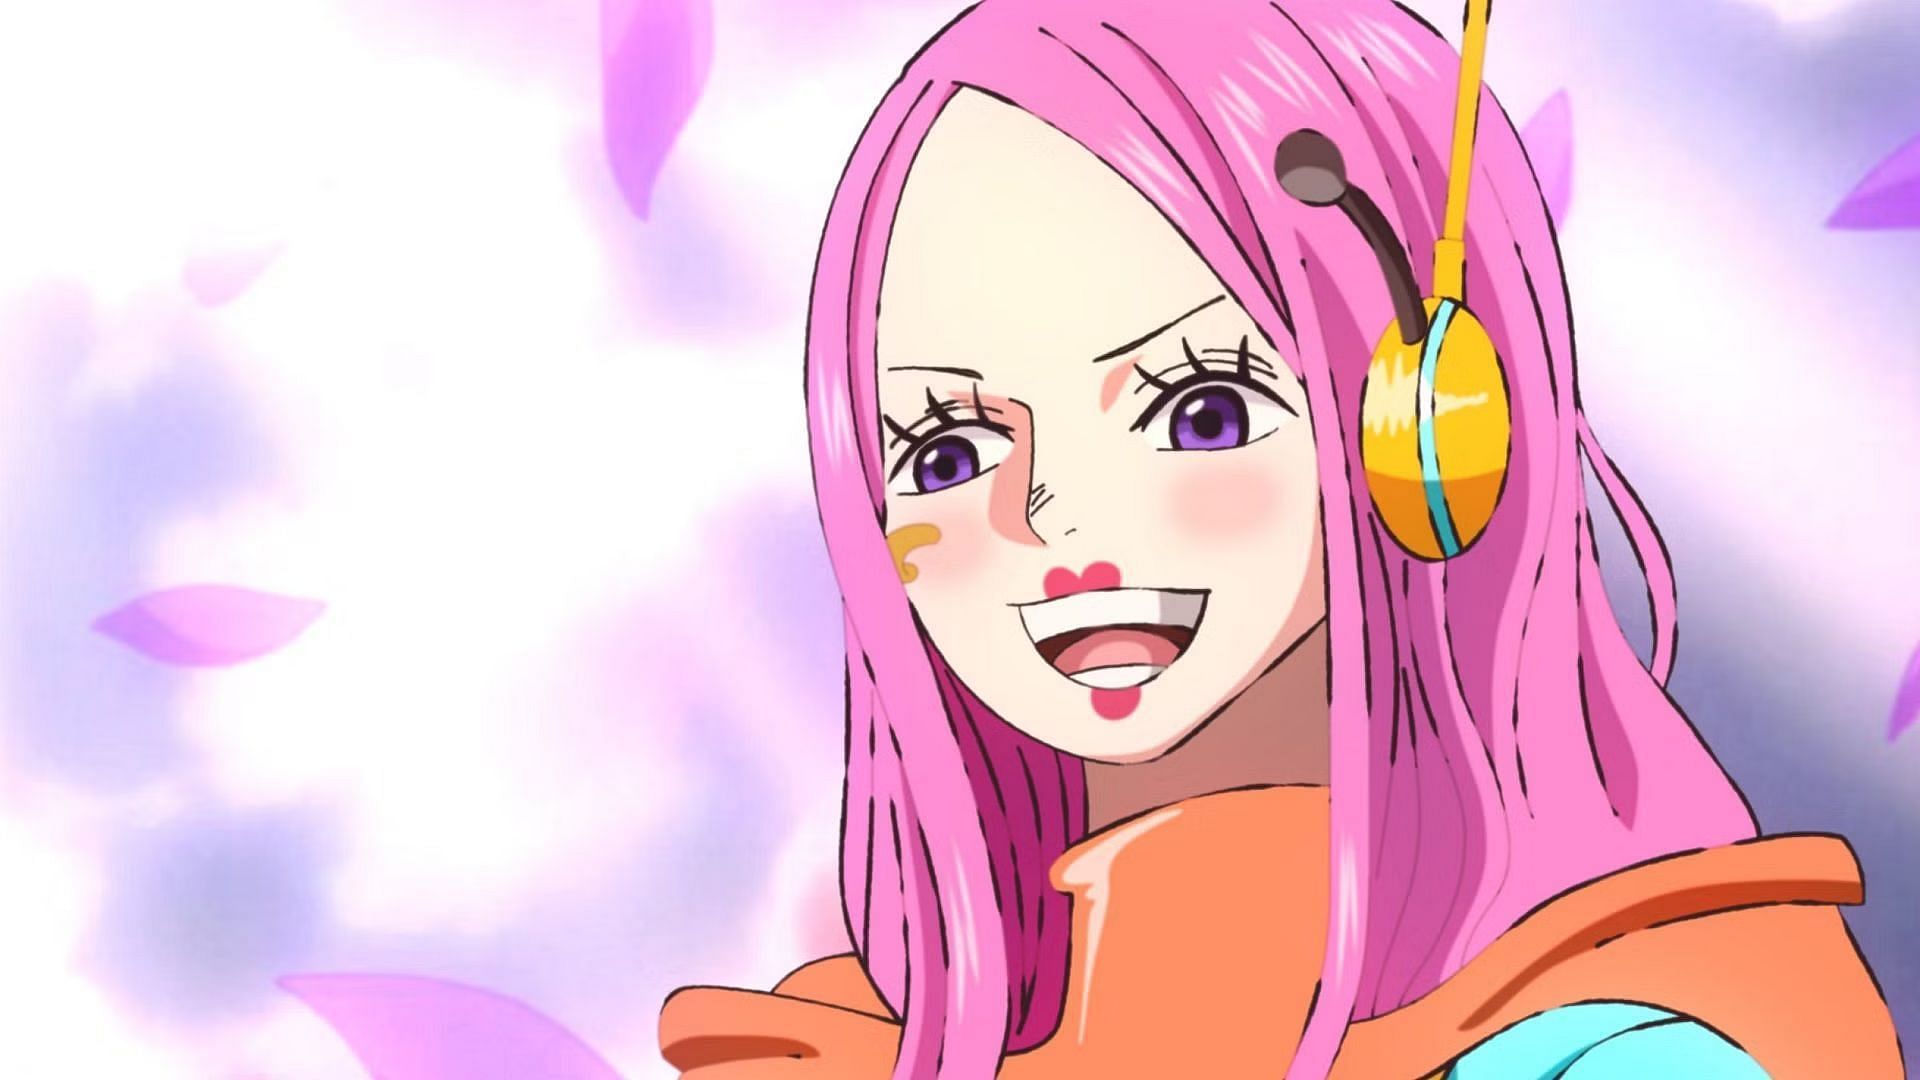 Bonney became Nika using Distortion Future in chapter 1118 (Image via Toei Animation)